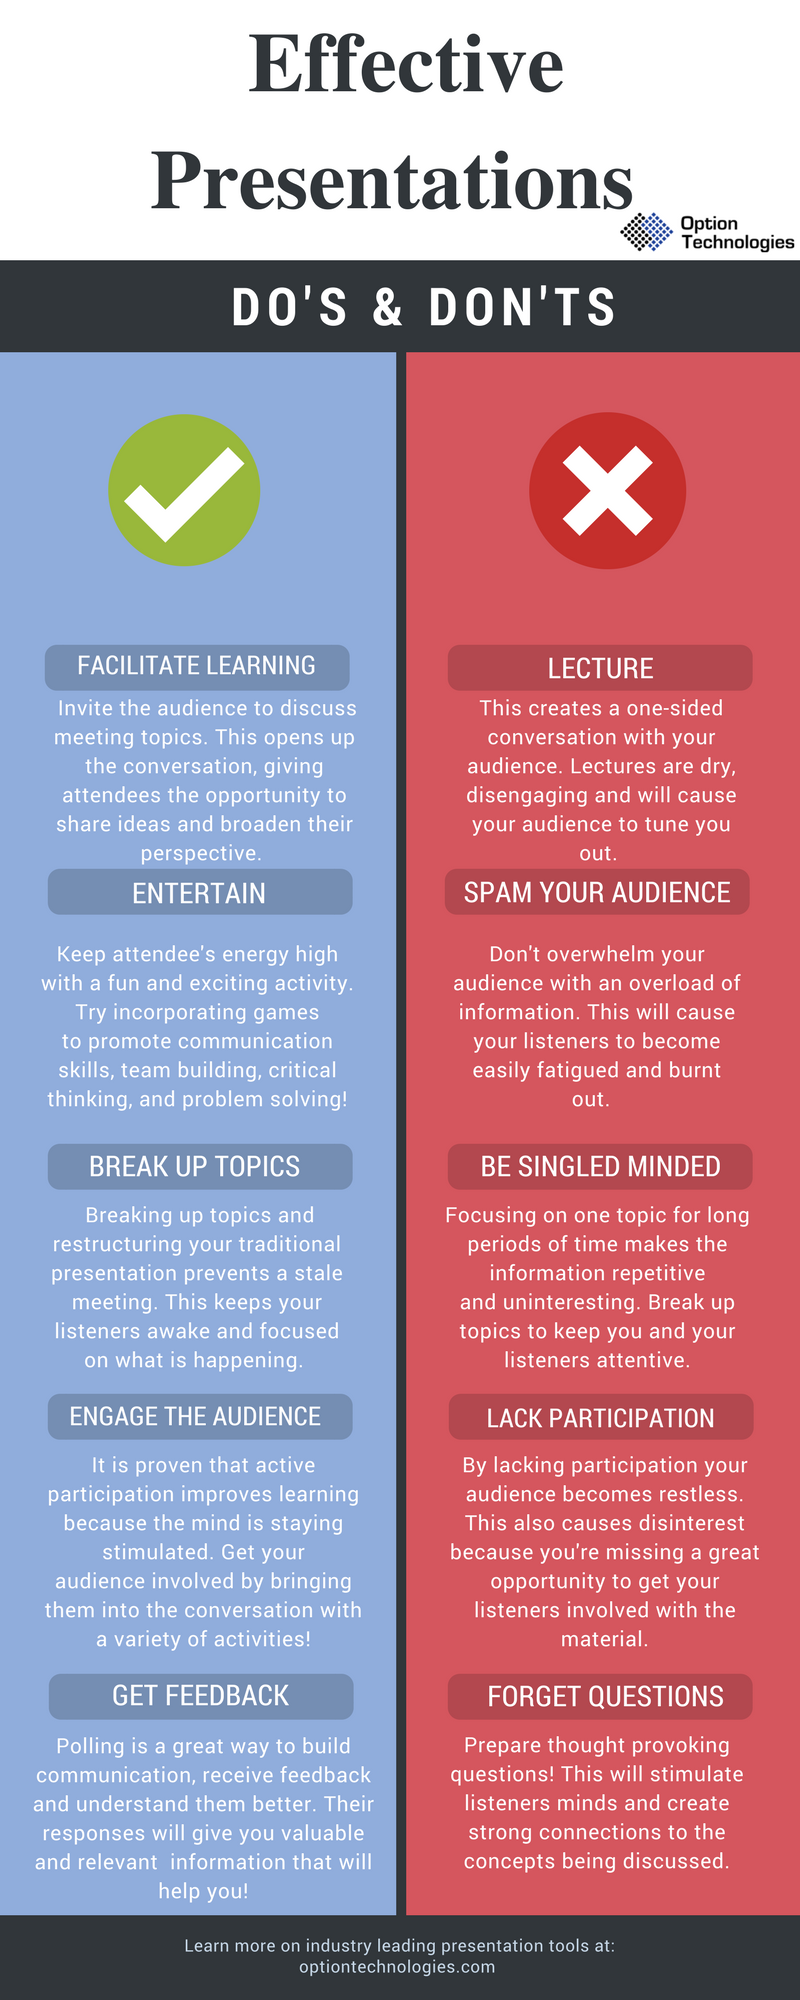 oral presentation do's and don'ts